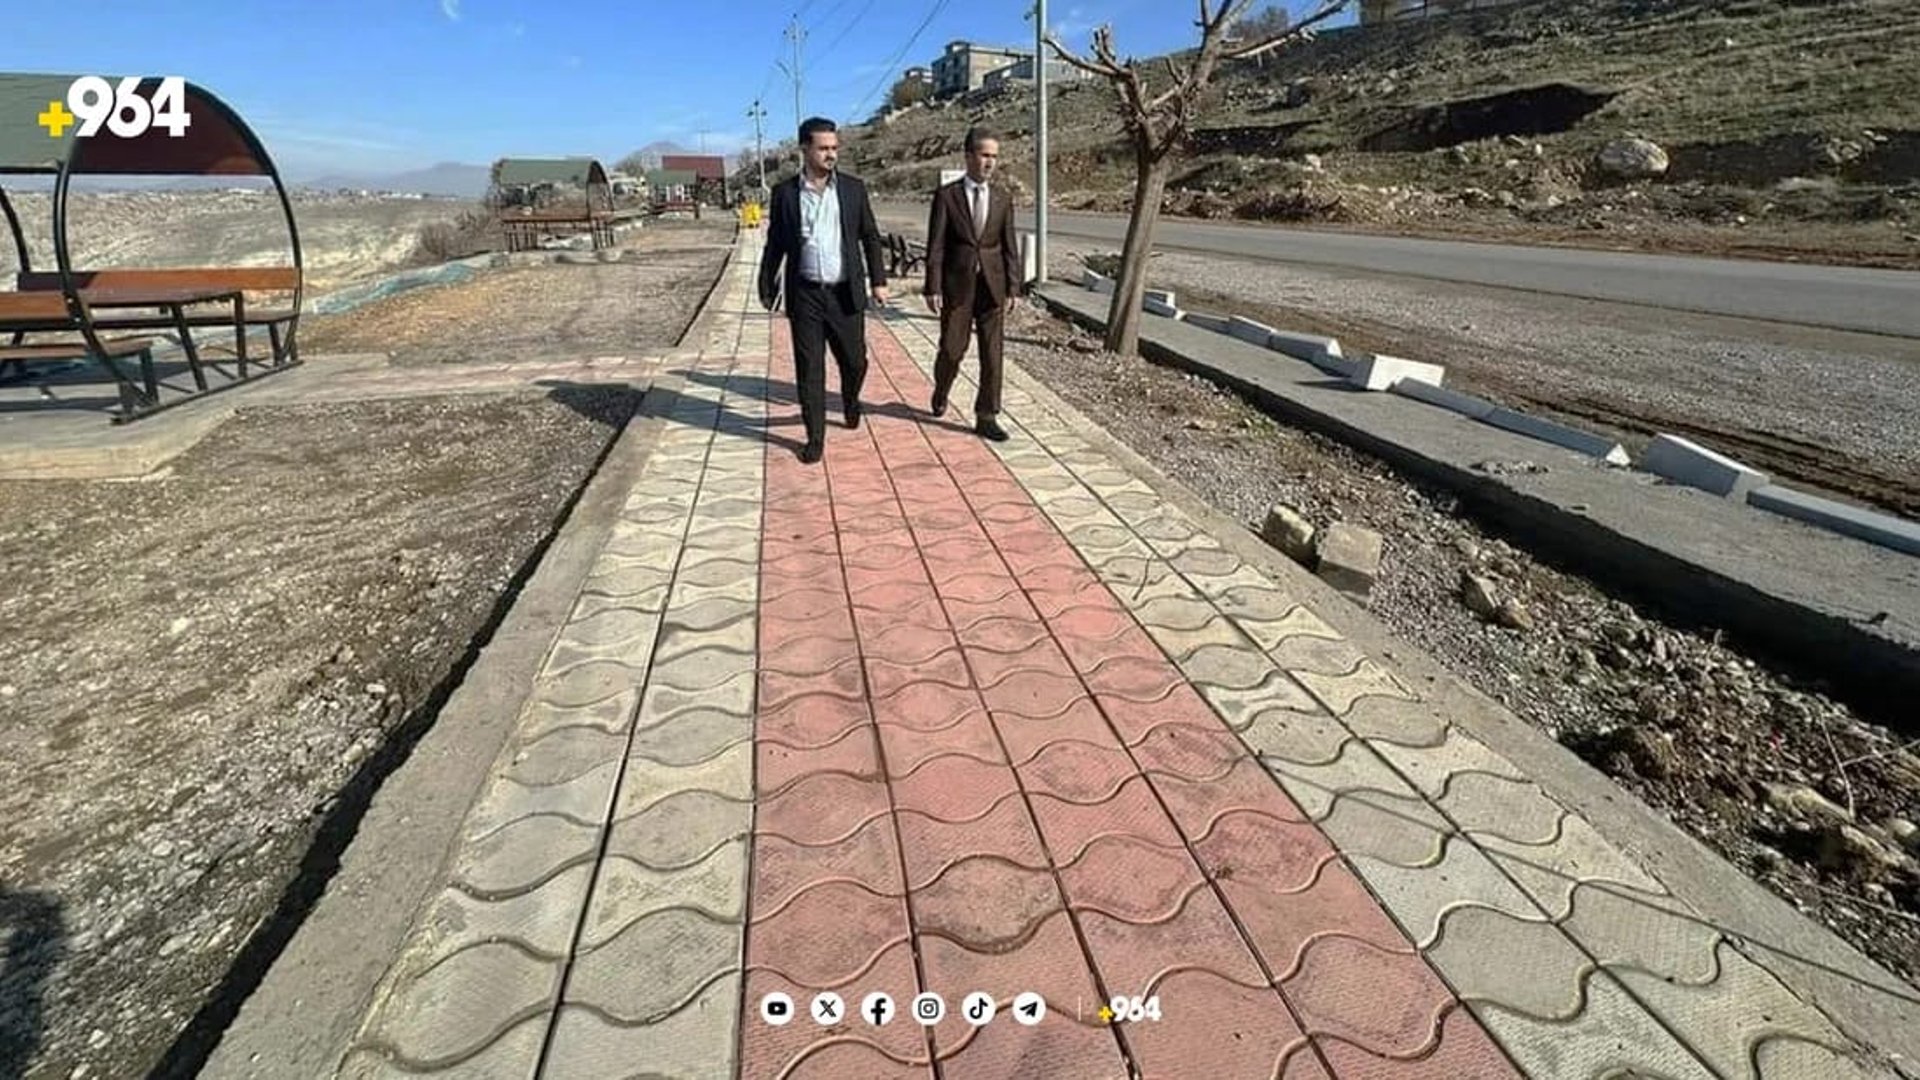 Bekhal to undergo transformation bringing more greenery rest areas and bridges